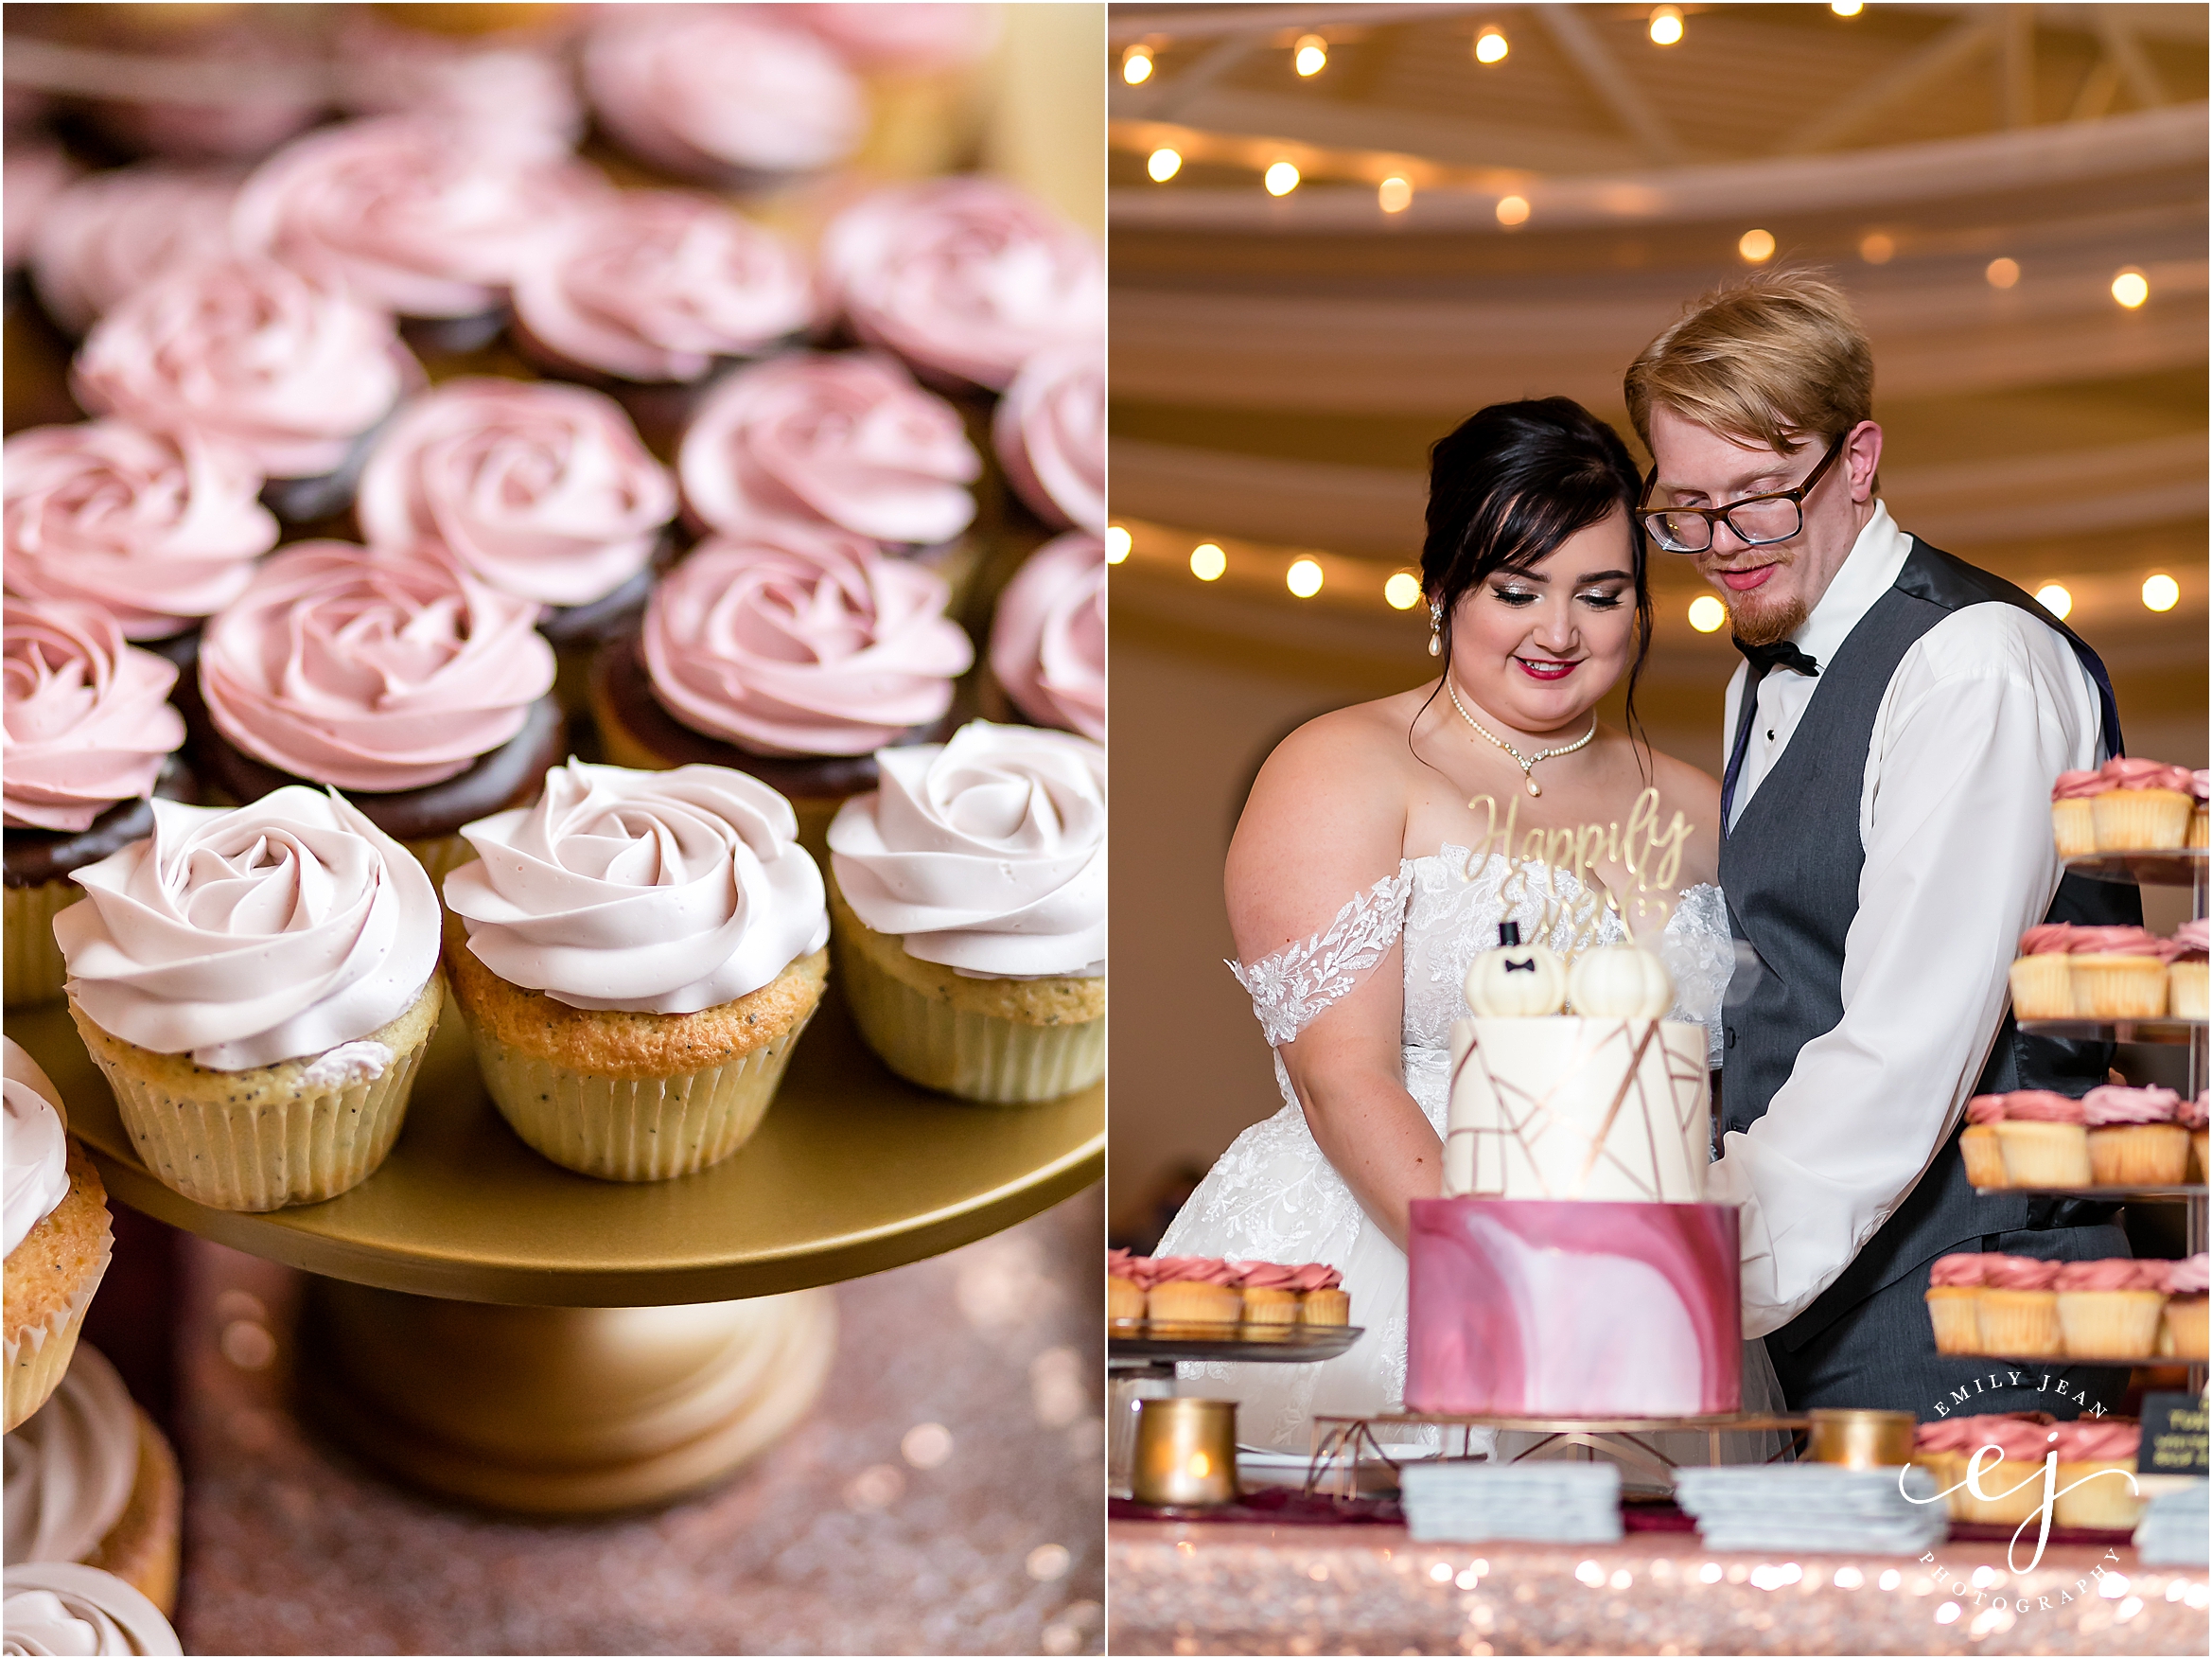 shades of pink cupcakes on gold platter with sequin table cloth bride and groom cutting pink cake